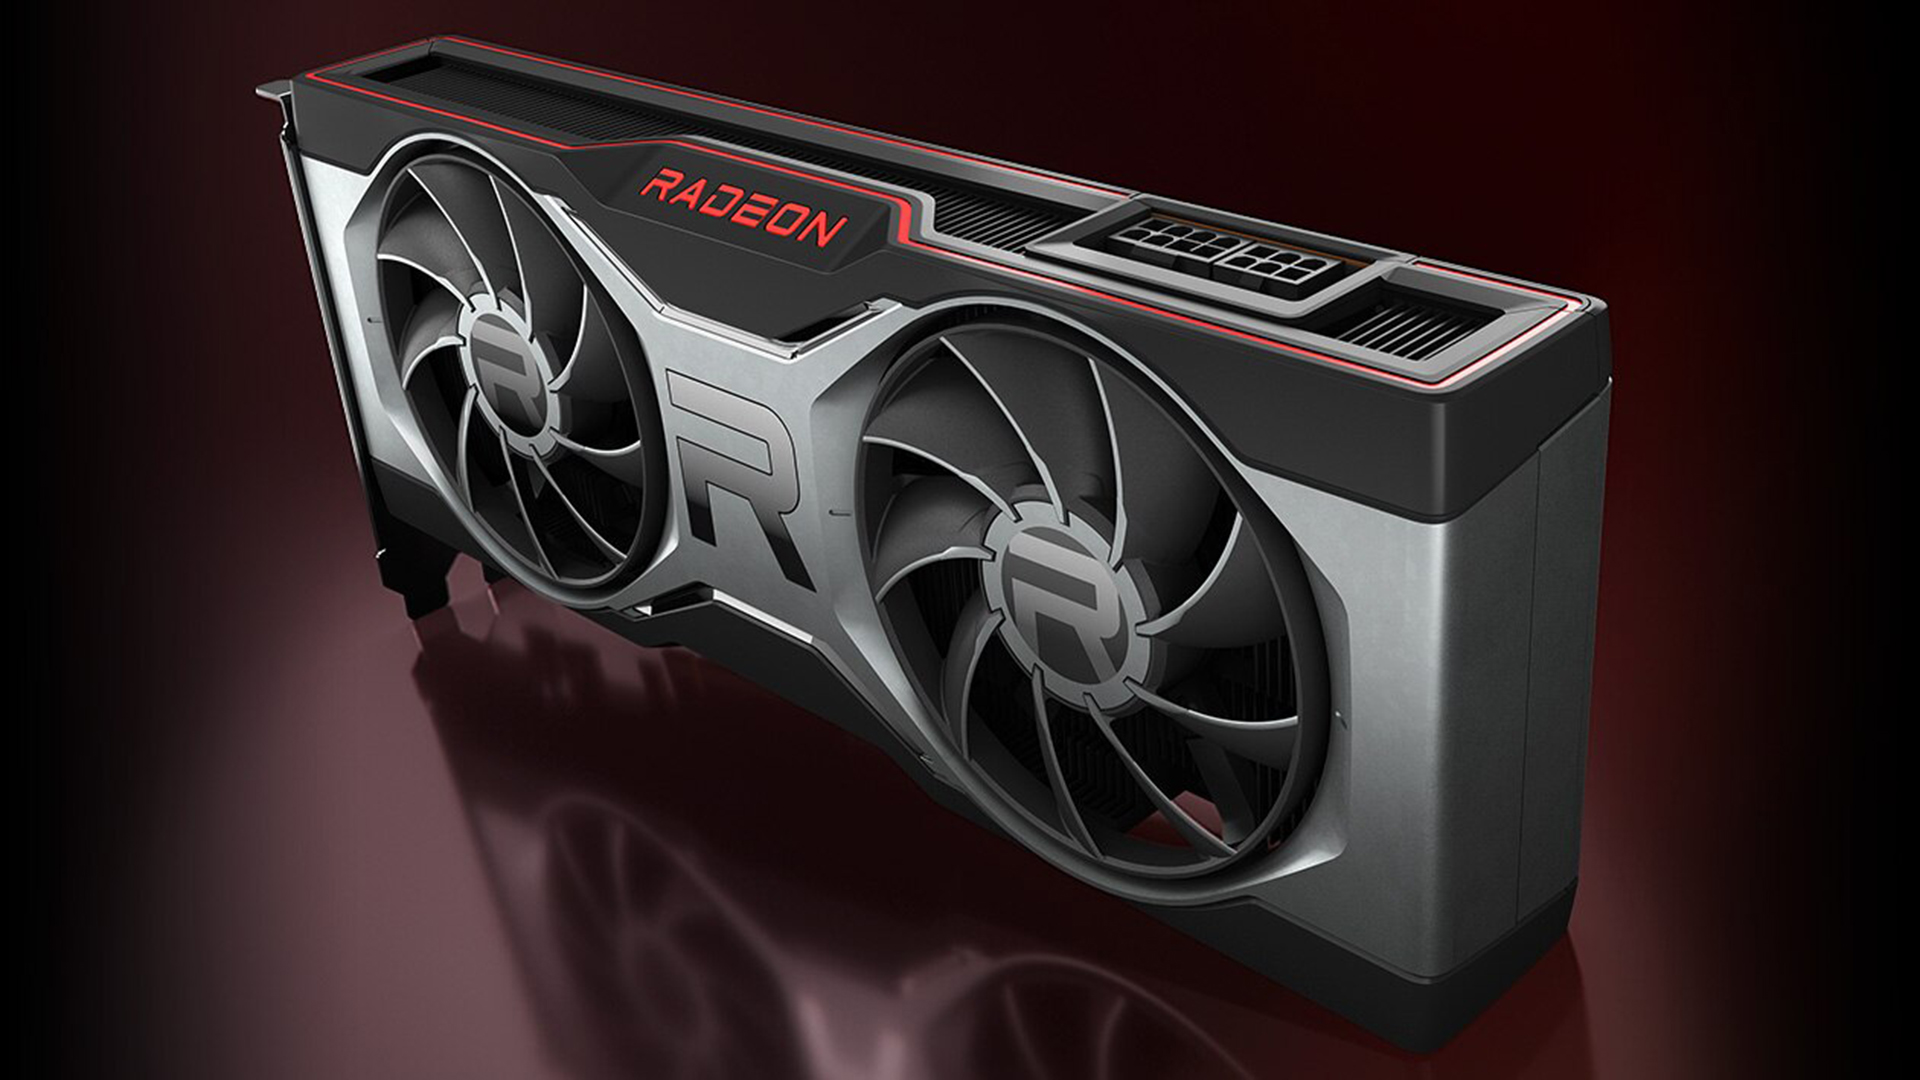 Amd’s Flagship Rdna 3 Gpu May Not Have An All New Design After All